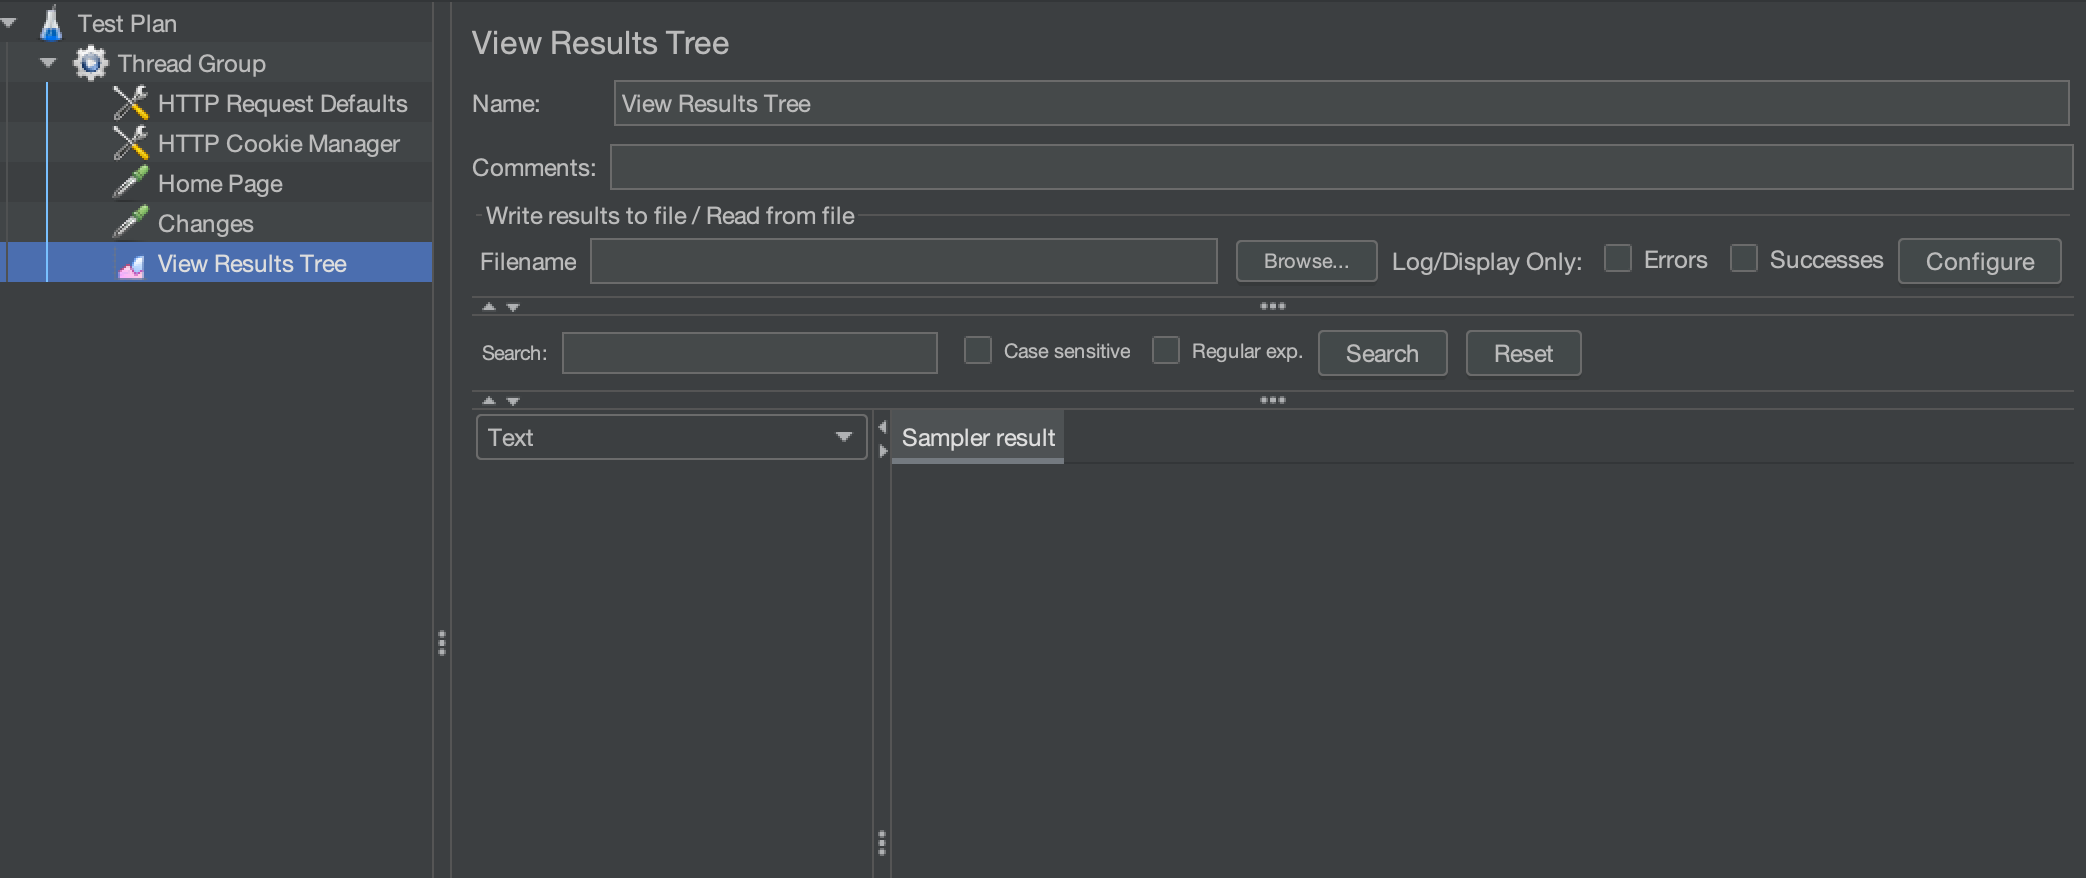 View Results Tree